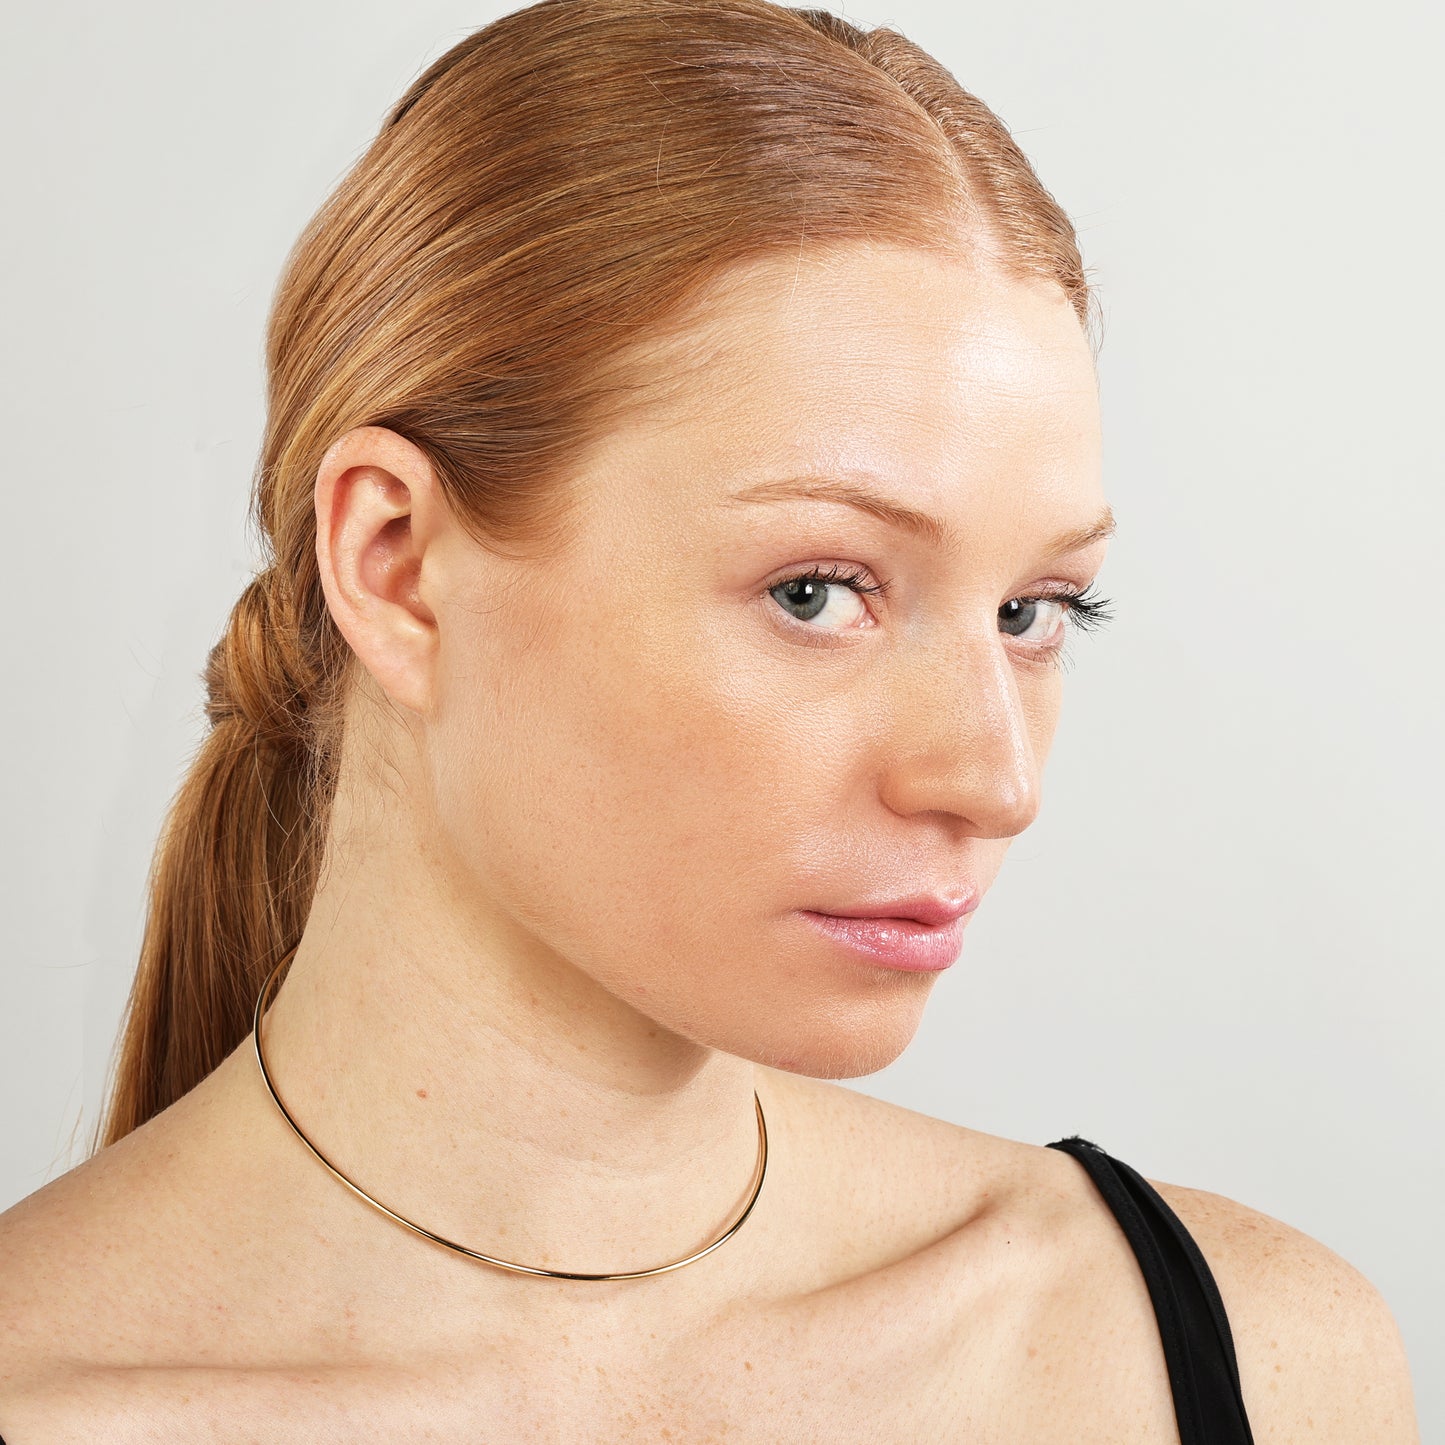 Slim gold choker necklace can add a touch of understated elegance to any outfits.